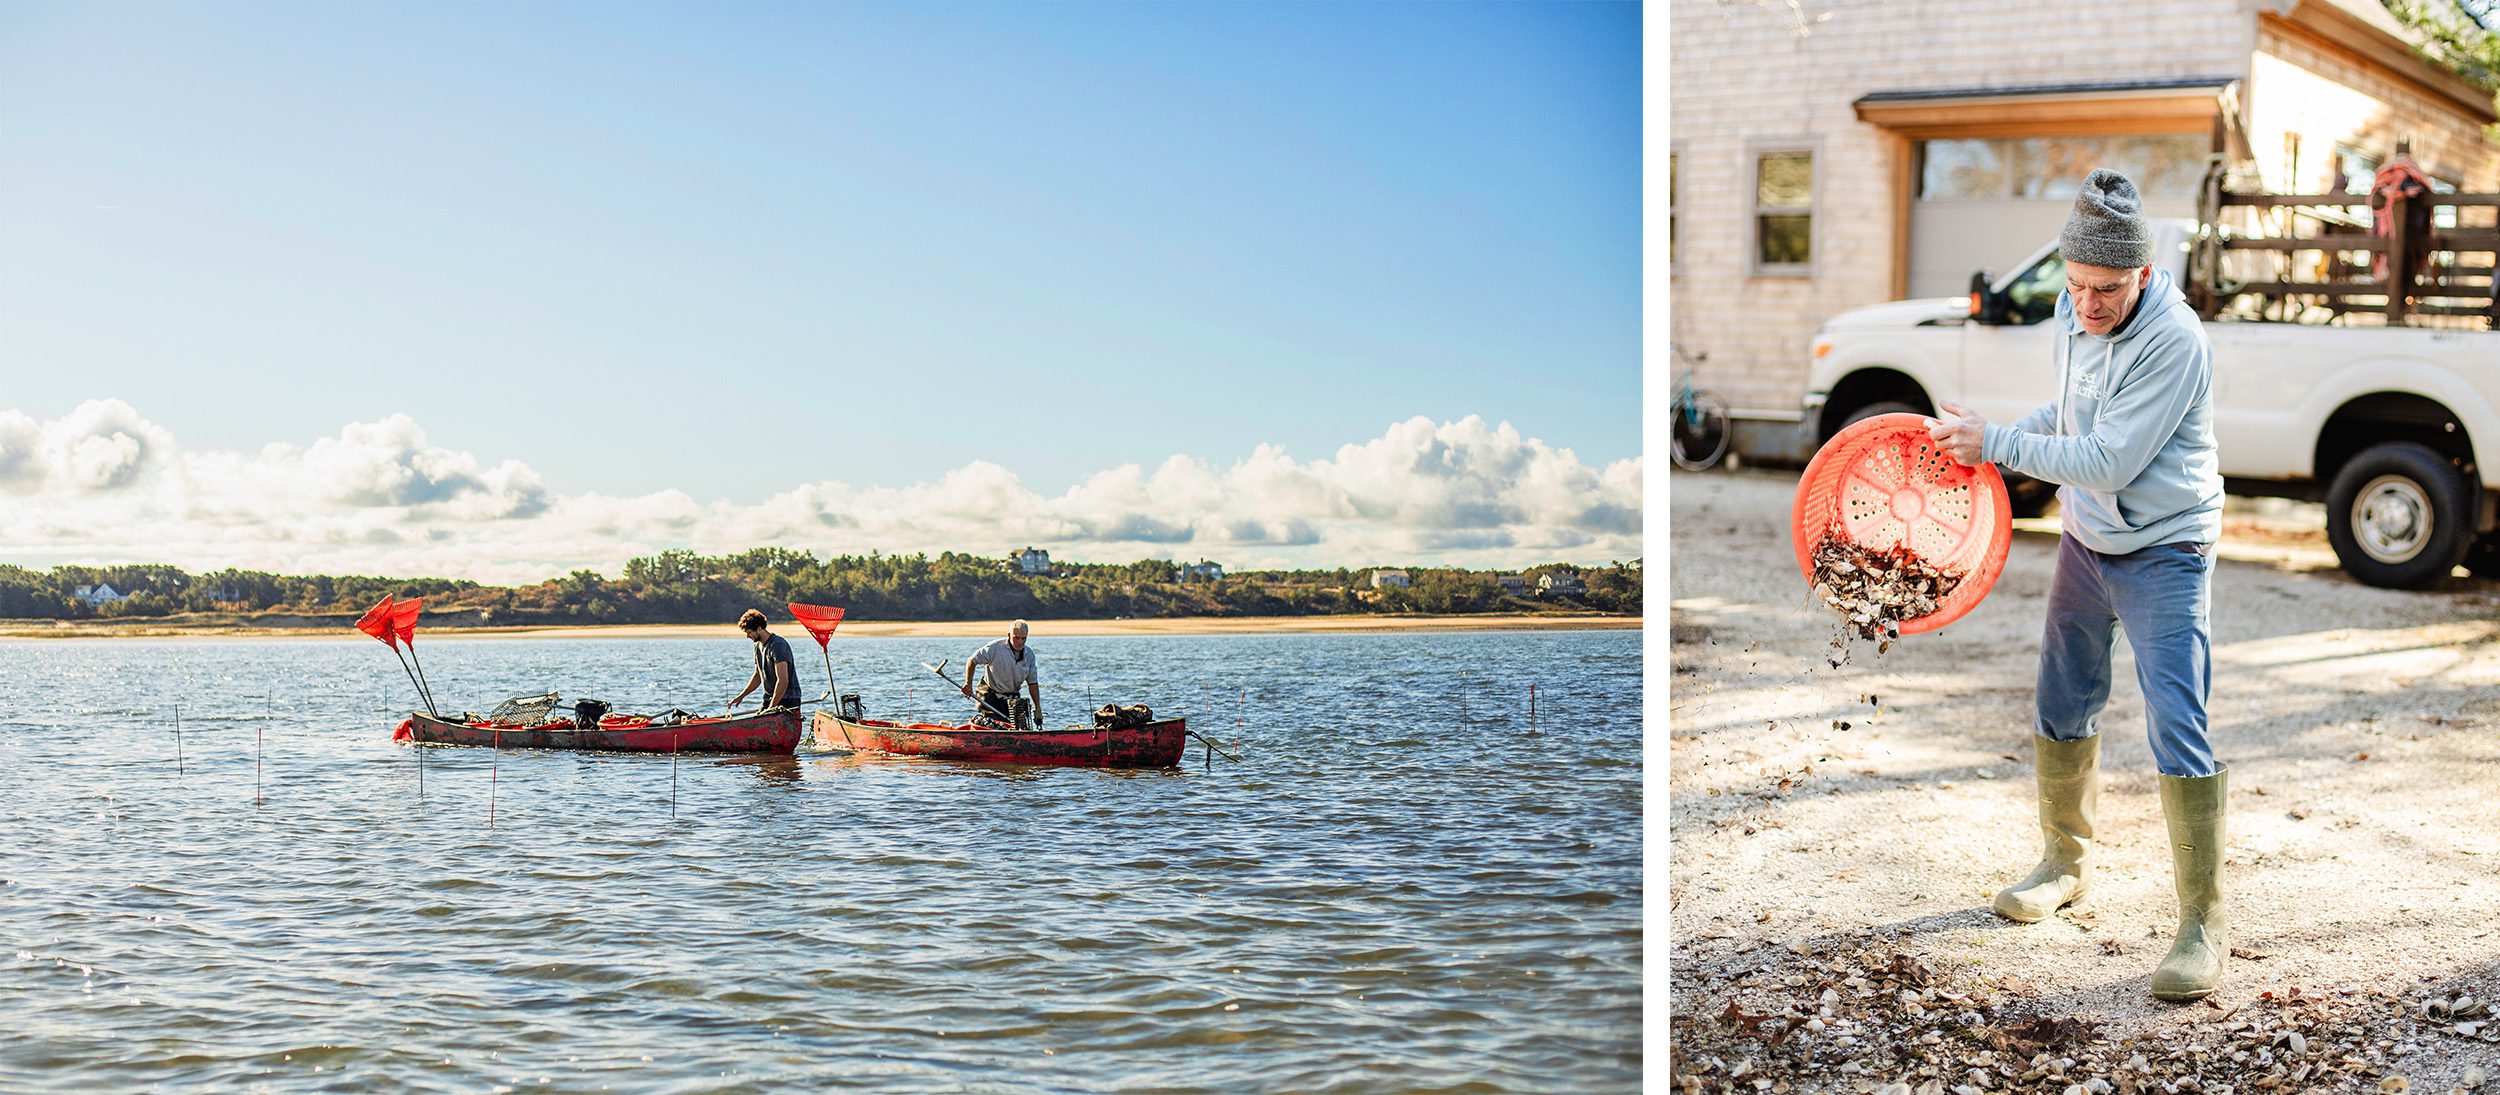 (Left) Jim O'Connell and his nephew James harvest clams on their farm in Wellfleet. (Right) O'Connell distributes clam shells from across his driveway. (Photo by Daniel Hentz, © Woods Hole Oceanographic Institution)